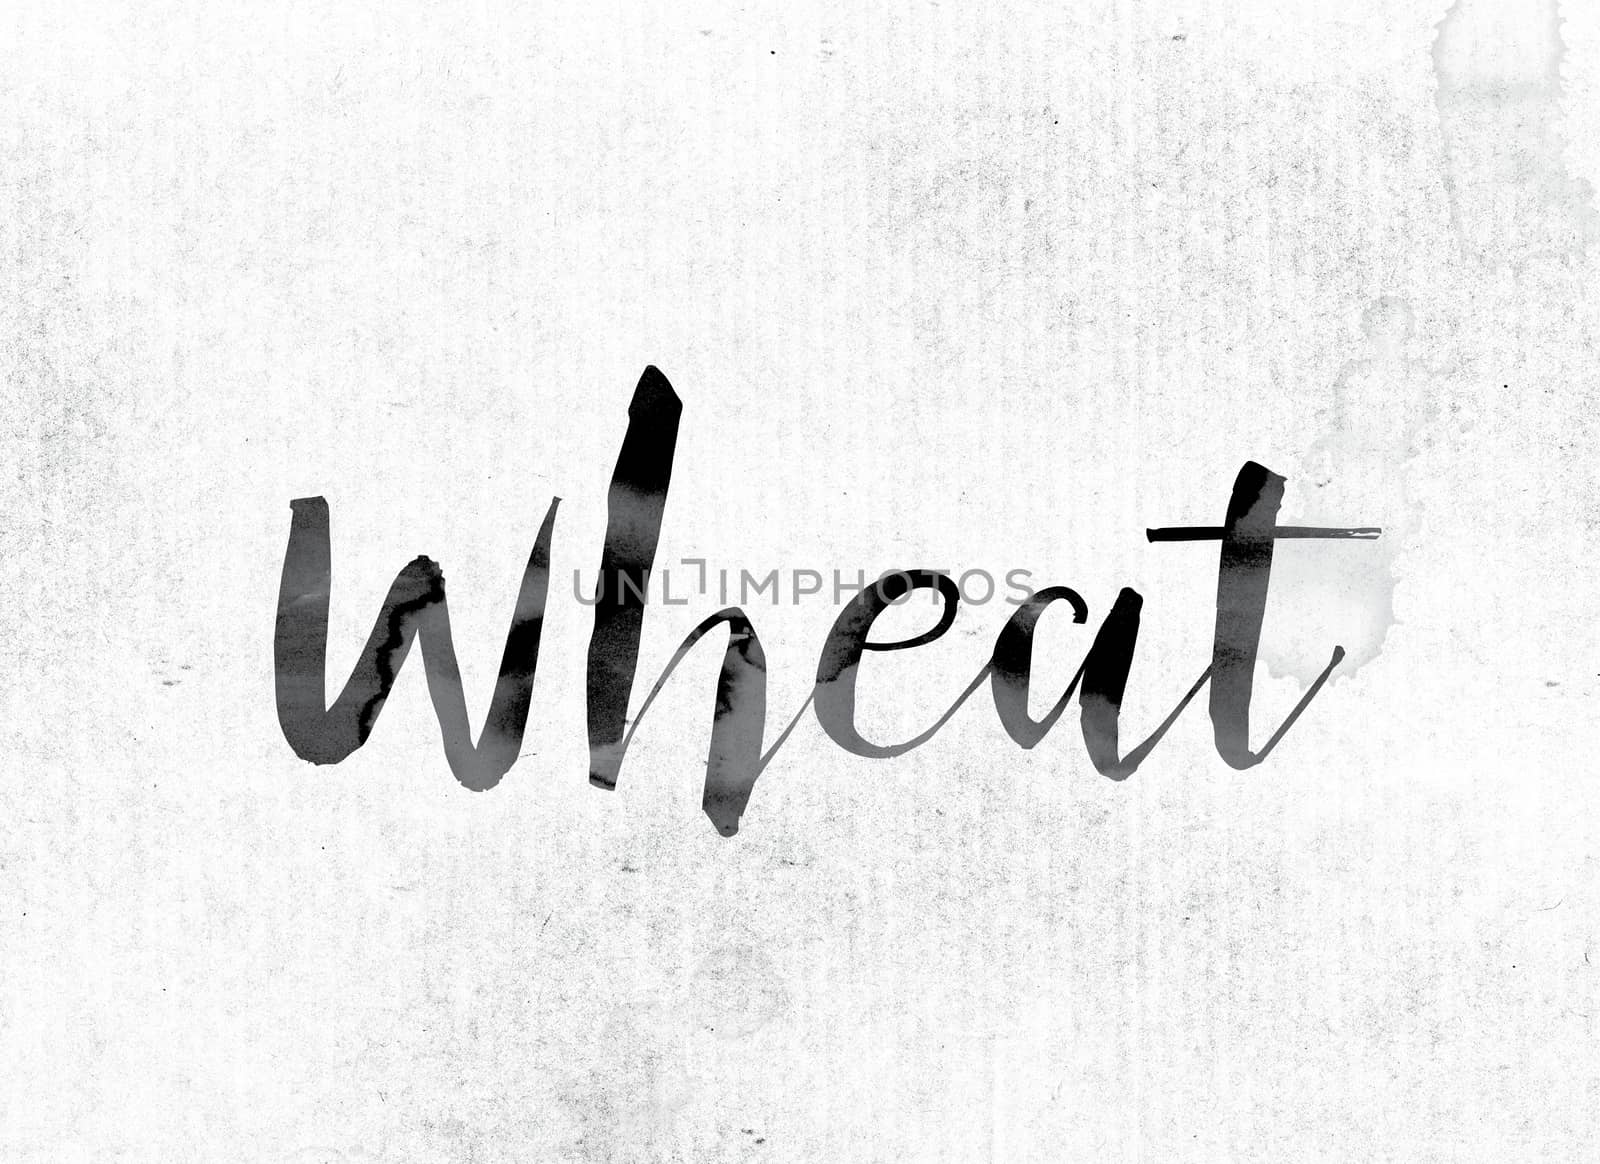 The word "Wheat" concept and theme painted in watercolor ink on a white paper.